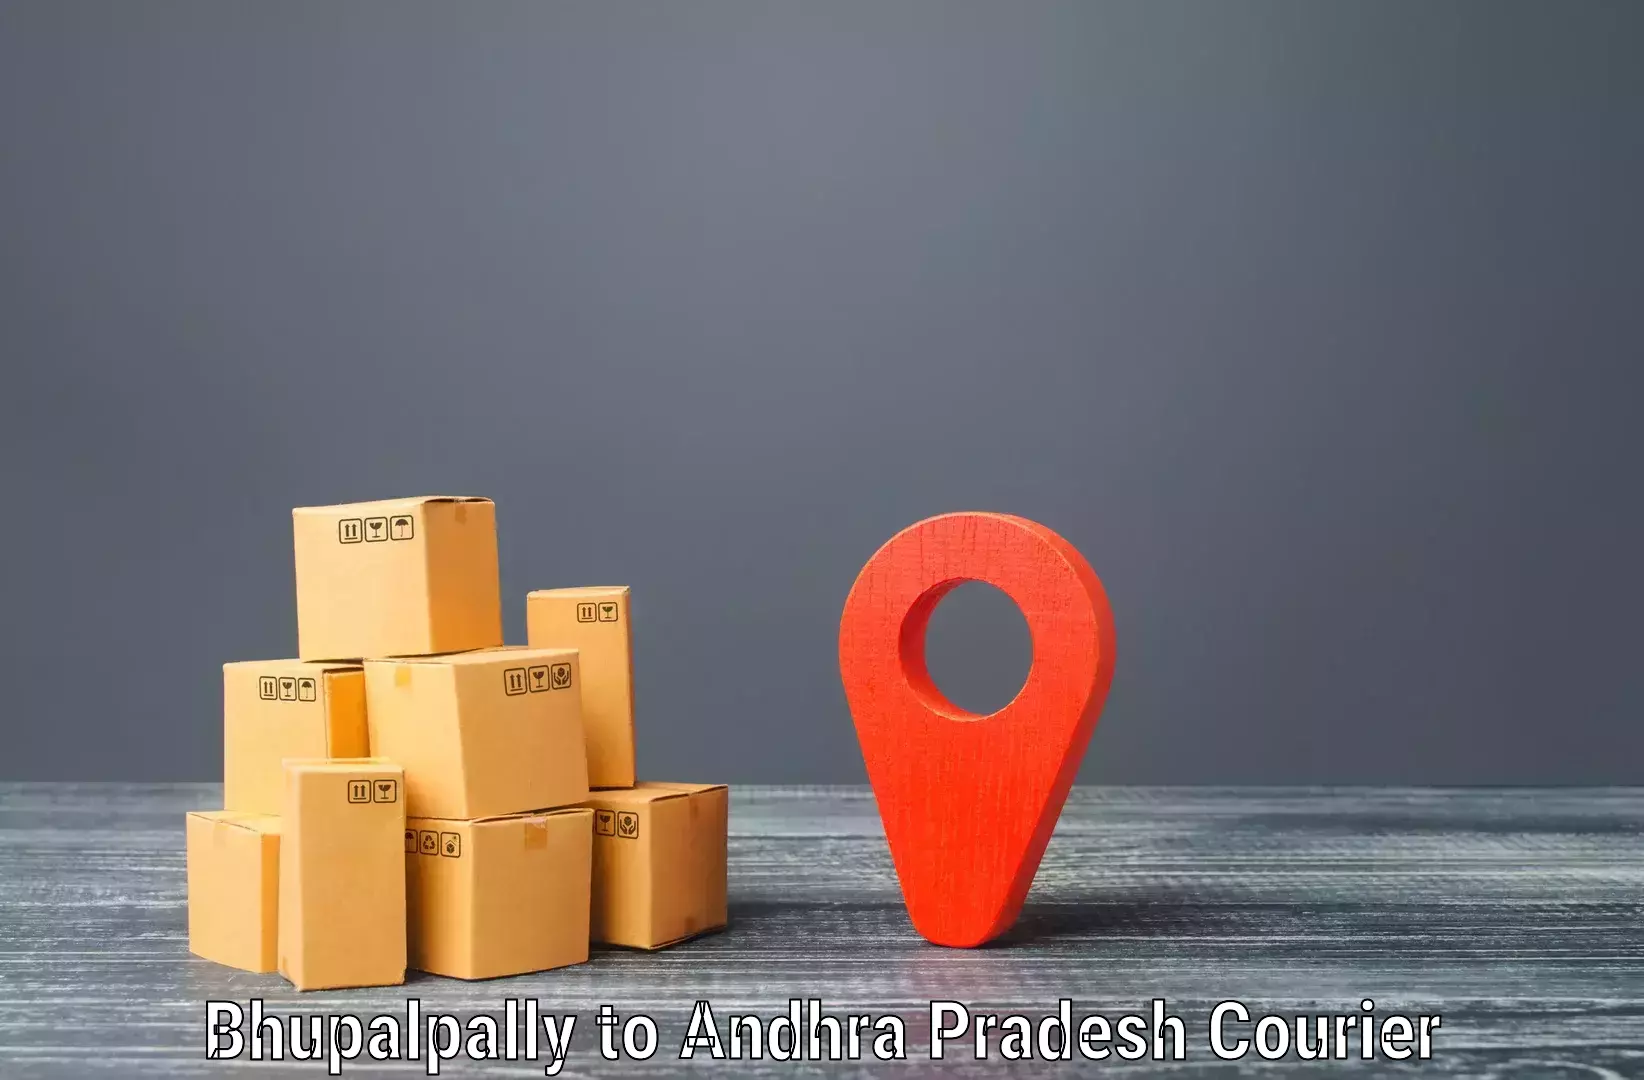 Delivery service partnership Bhupalpally to Martur